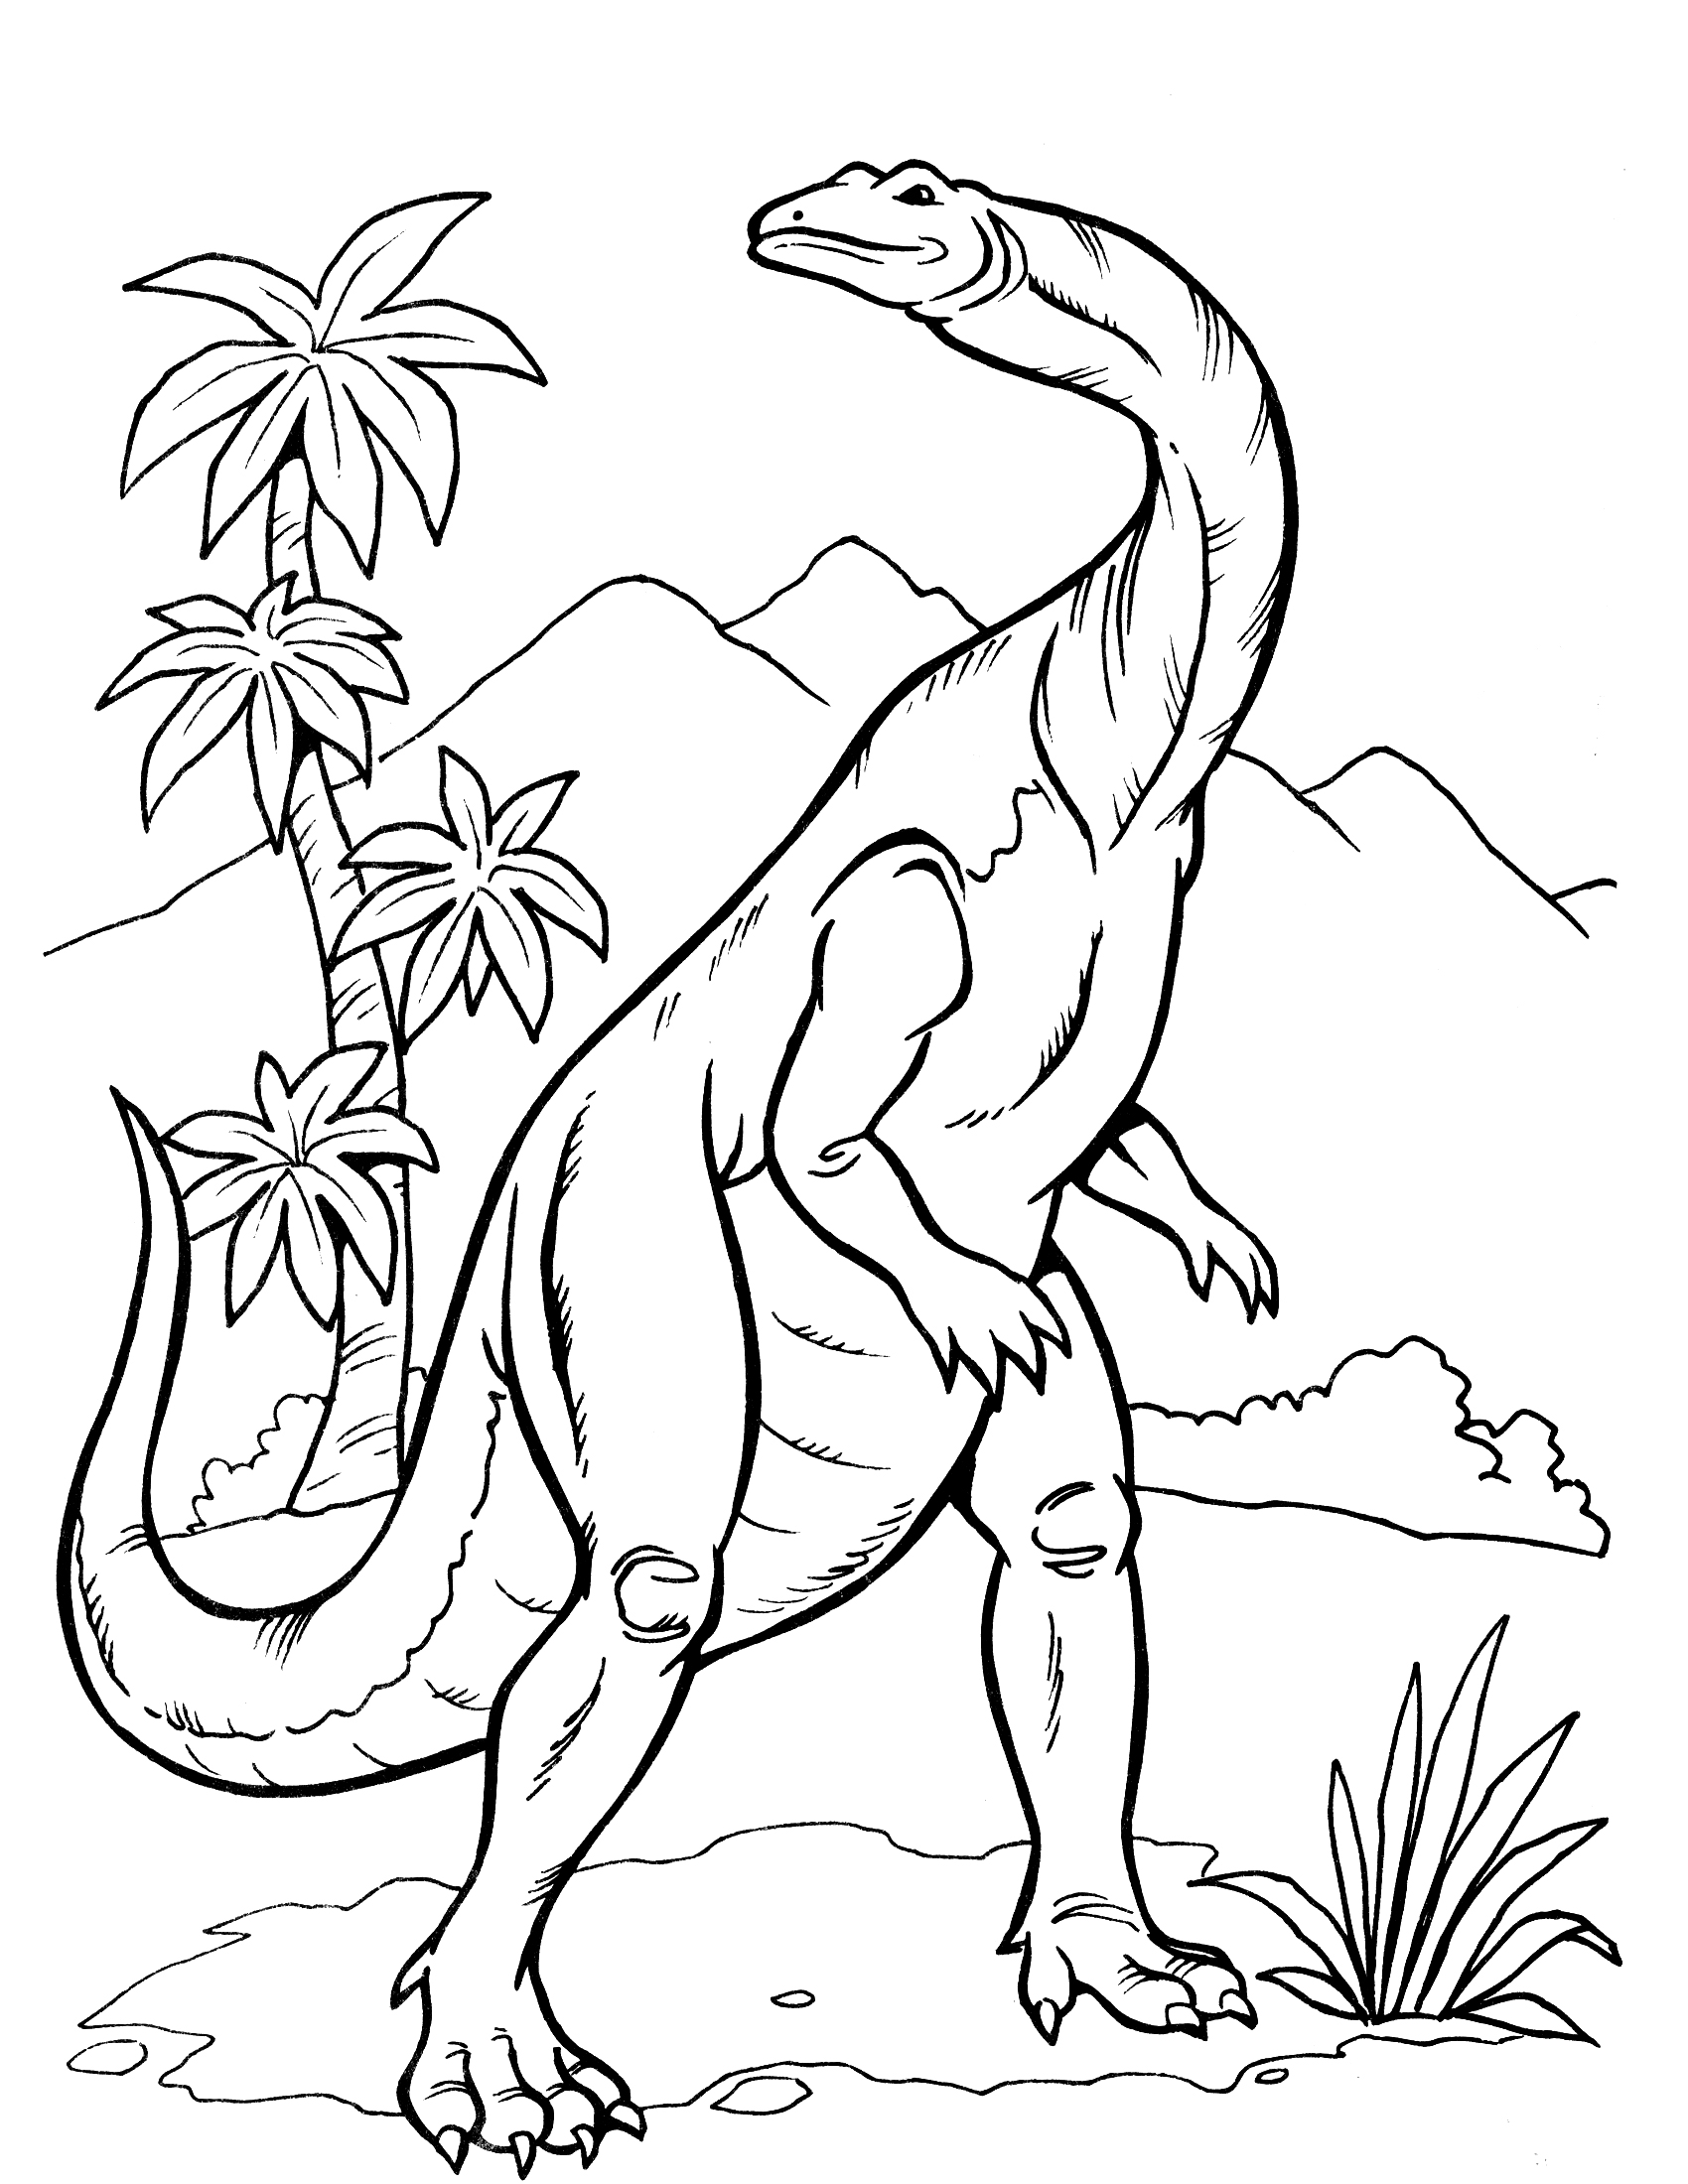  Detective Dinosaur Coloring Pages  | Coloring pages for Boys